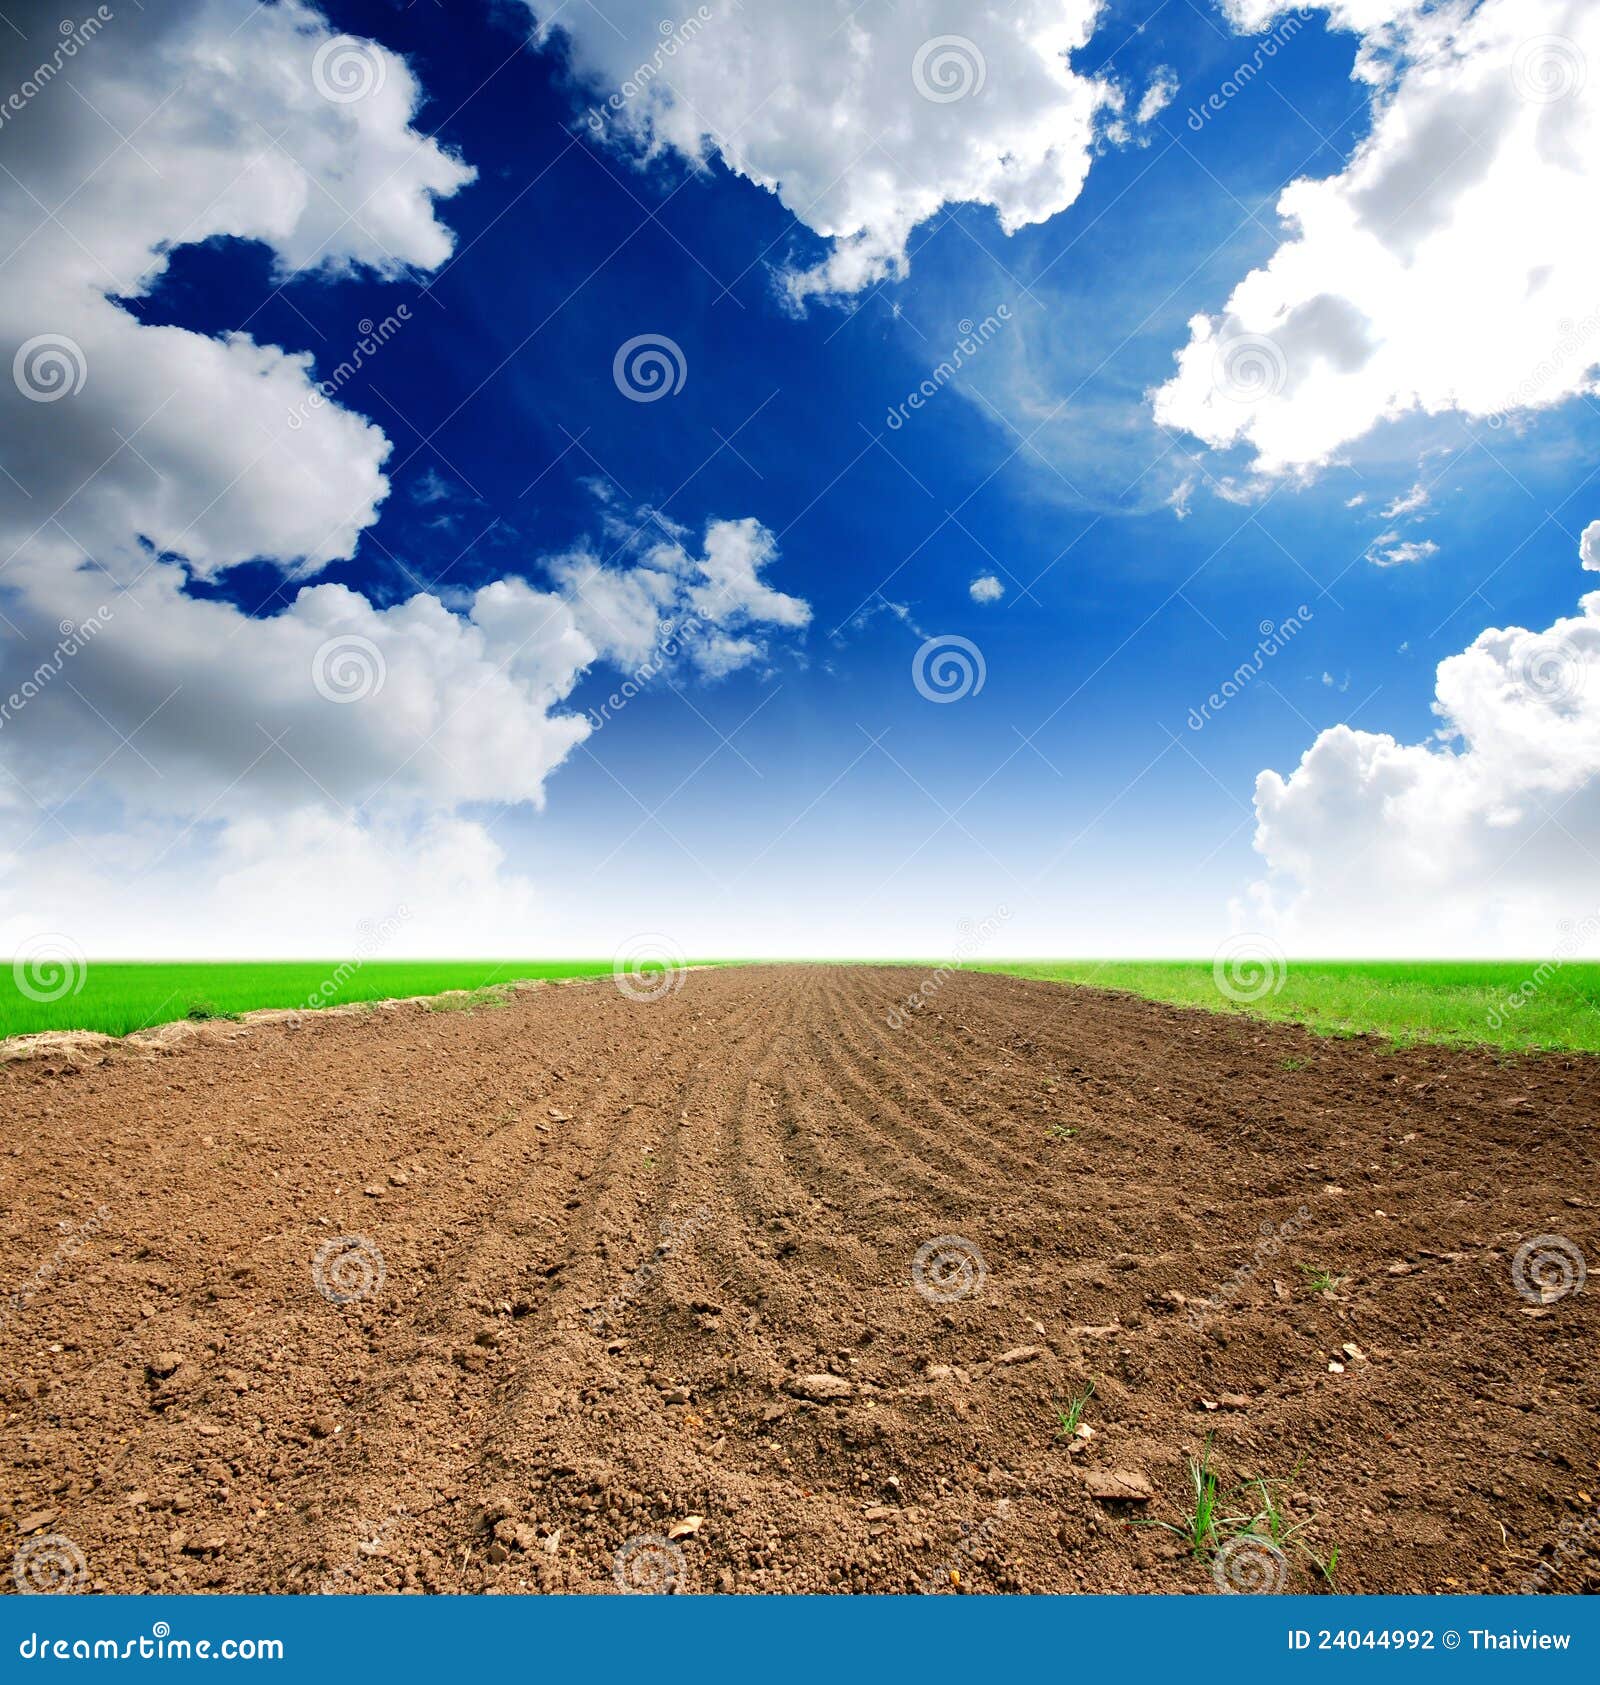 Soil Background stock photo. Image of field, meadow, agriculture - 24044992